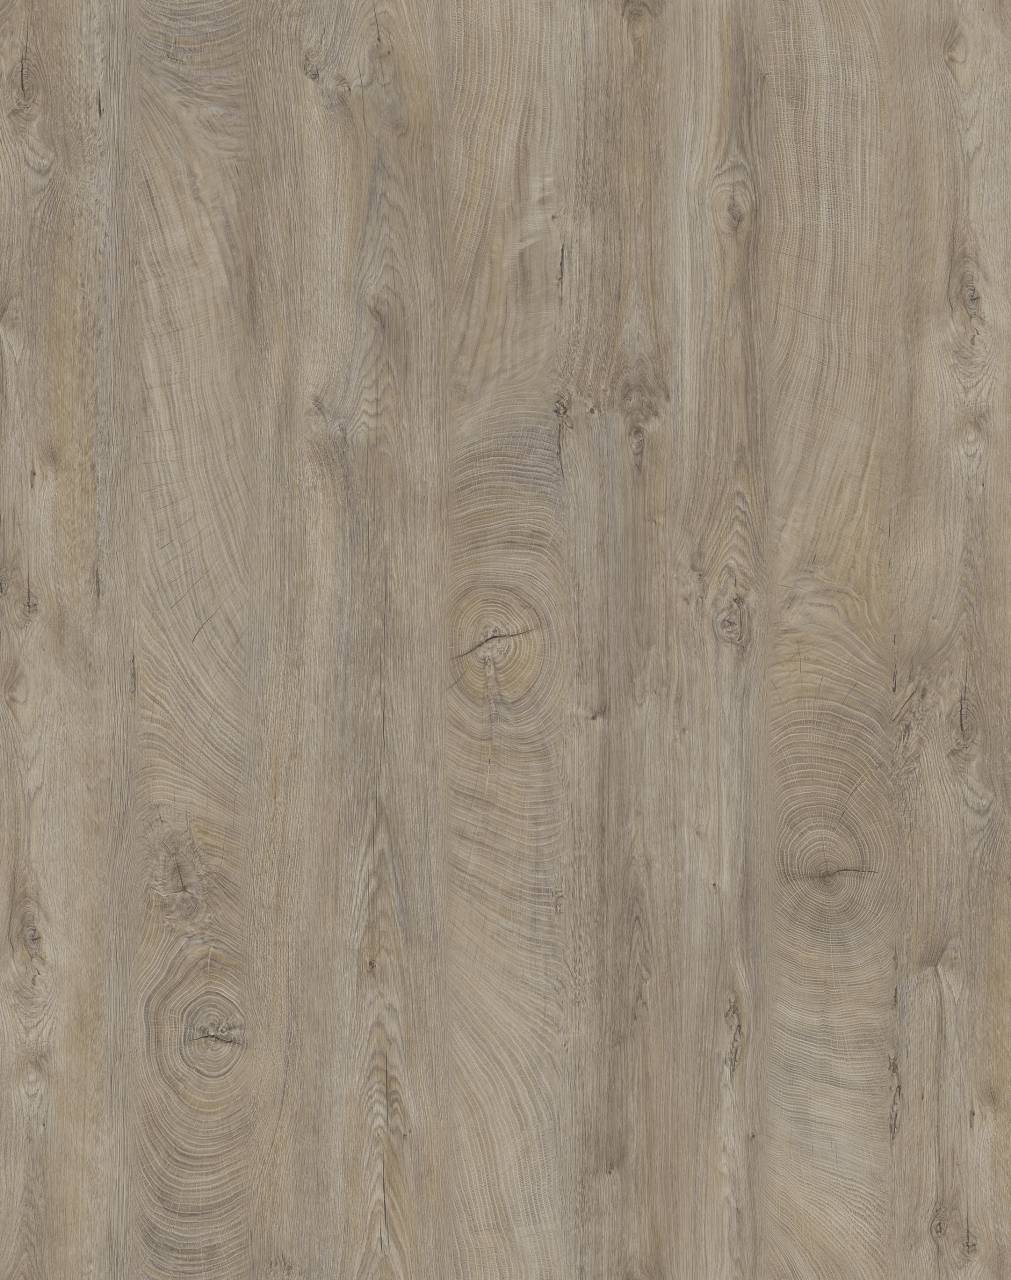 Raw Endgrain Oak HPL with textured surface and rustic brown tones for an authentic look.